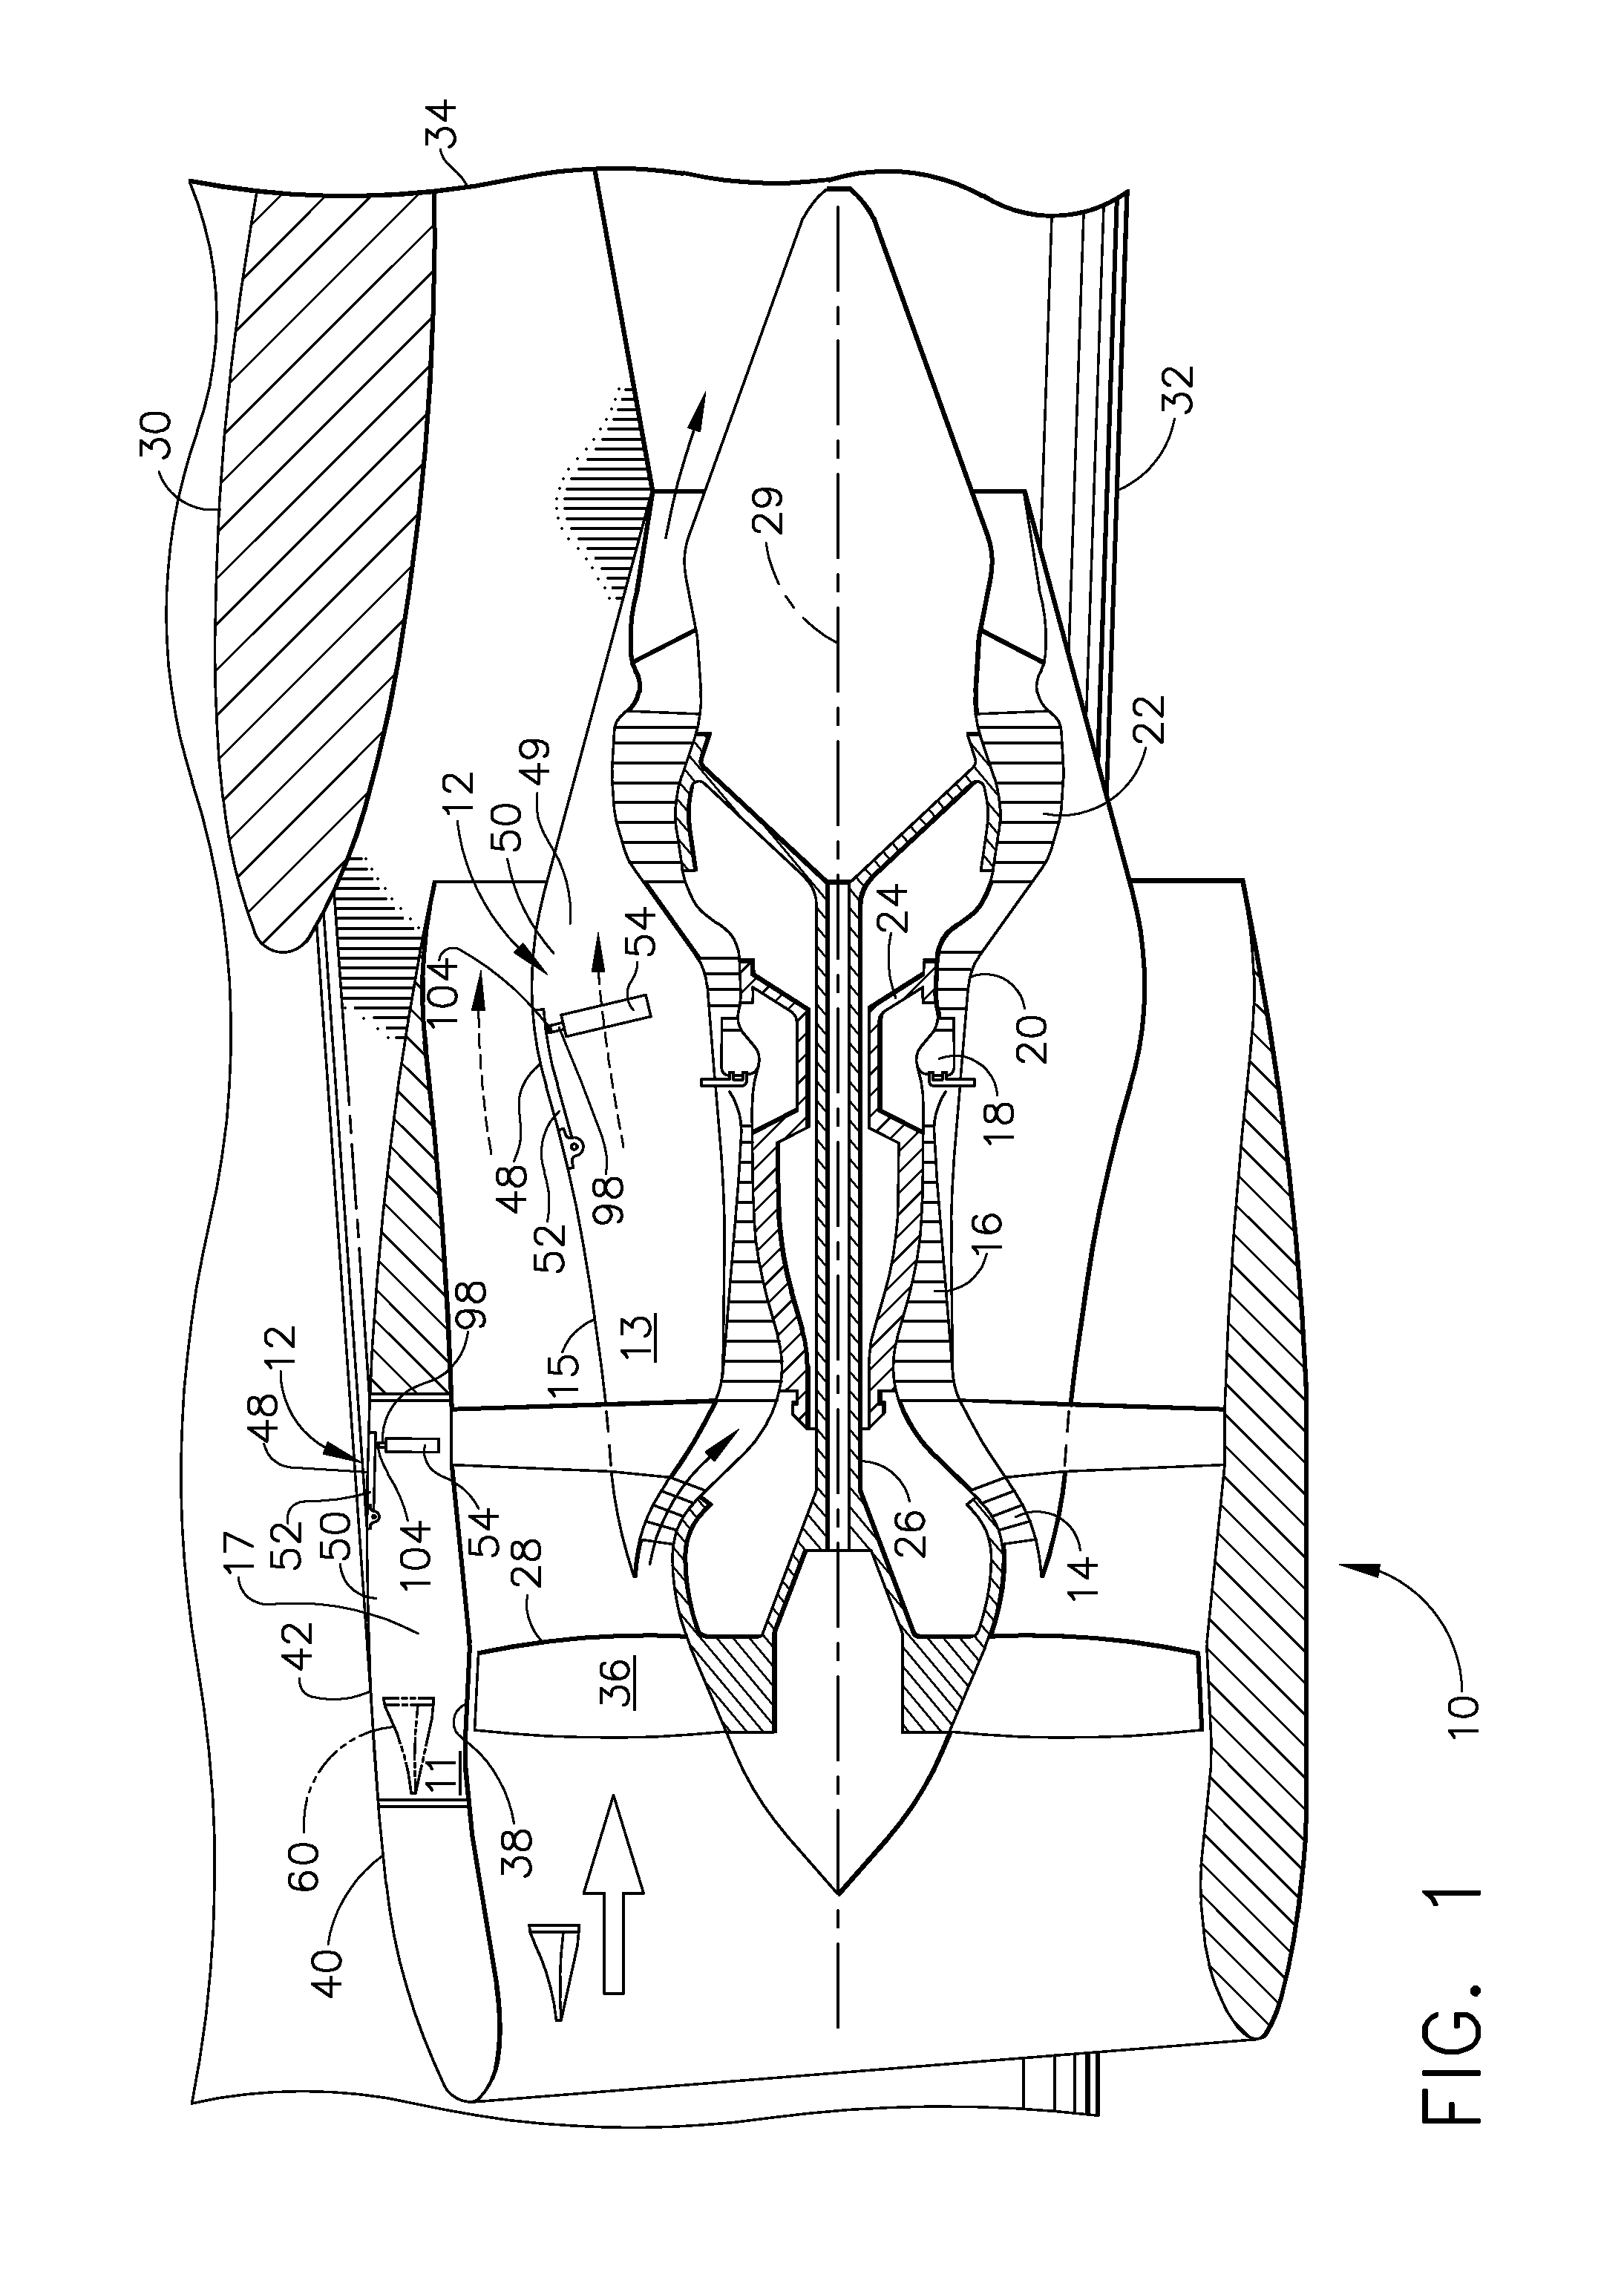 Thermally actuated passive gas turbine engine compartment venting